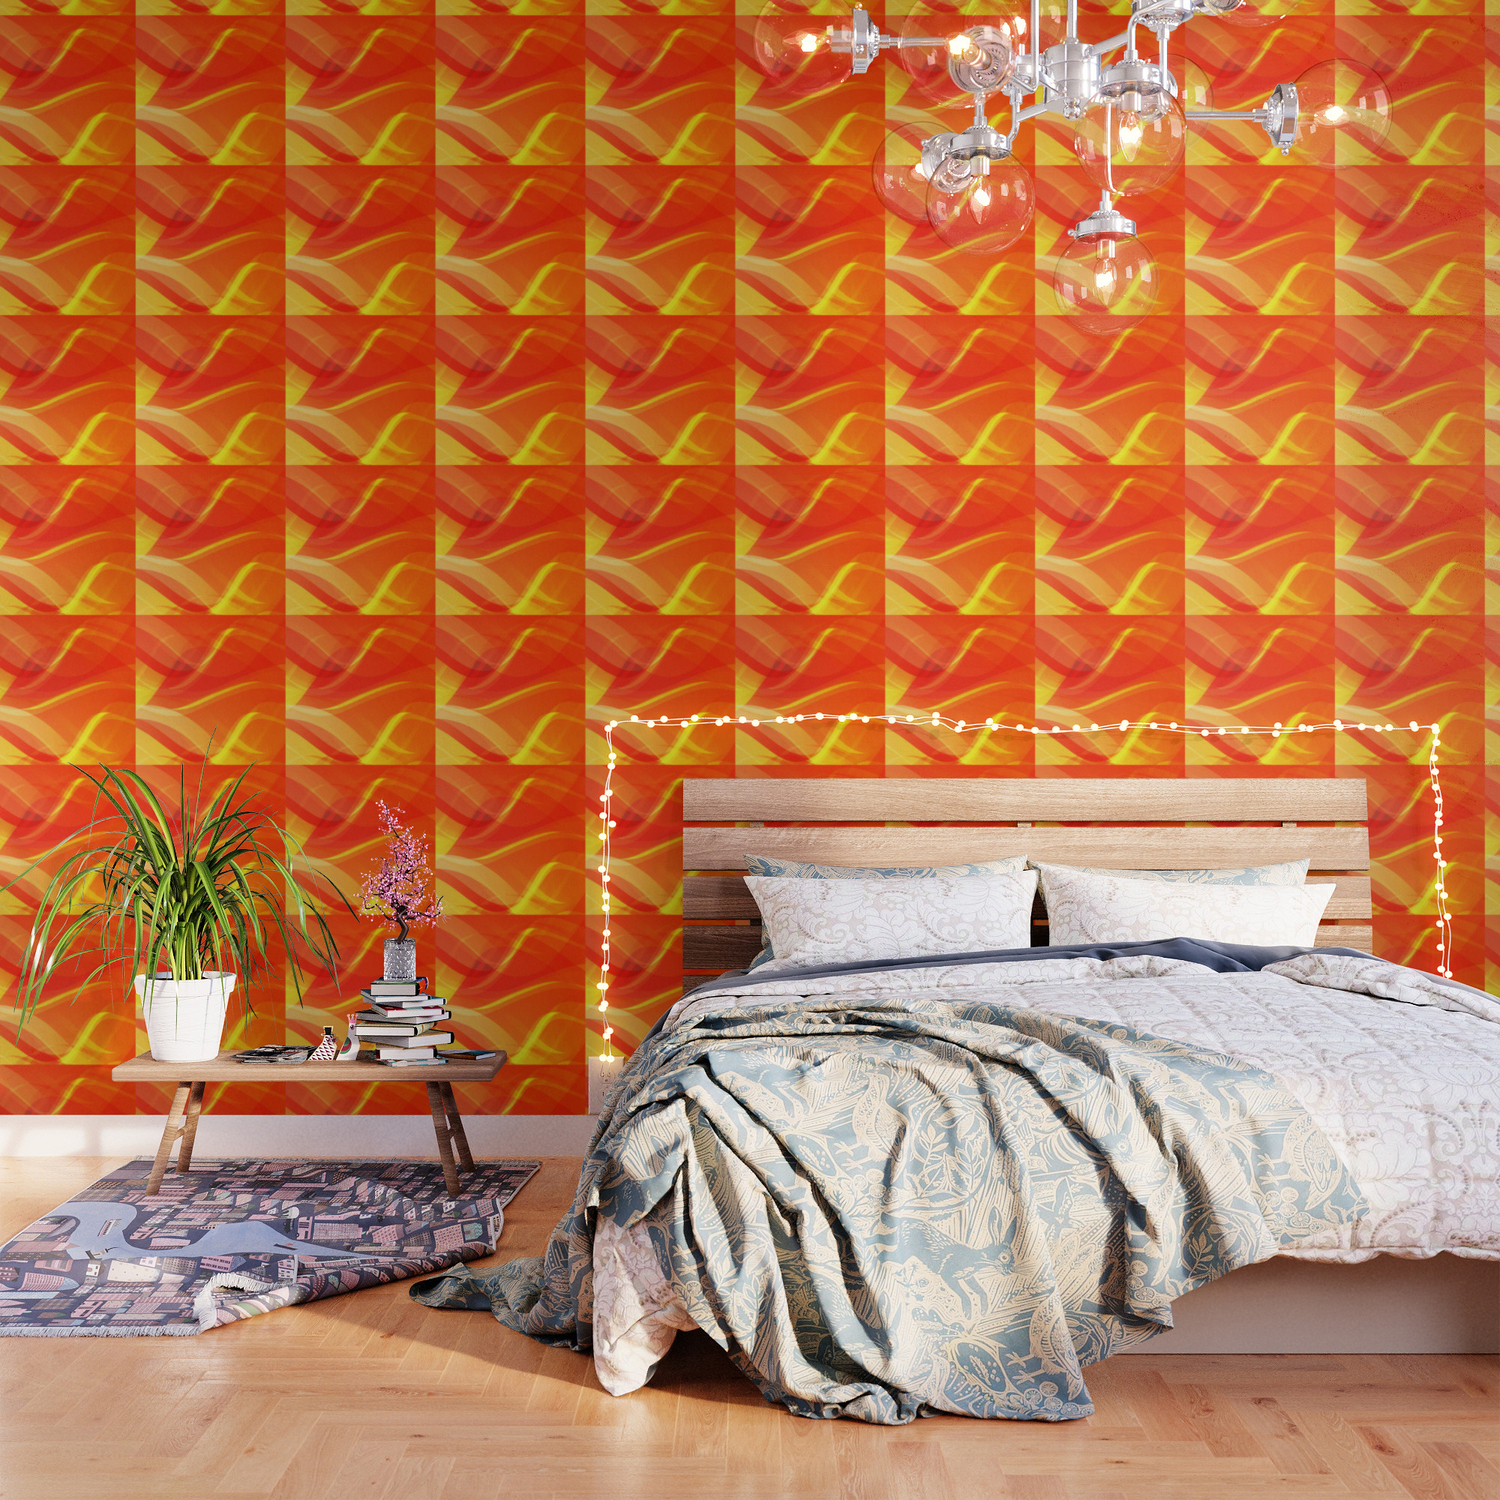 Theme of fire for the banner. Bright red and orange glare on a gentle  background for a fabric or pos Wallpaper by Grachyhamr | Society6